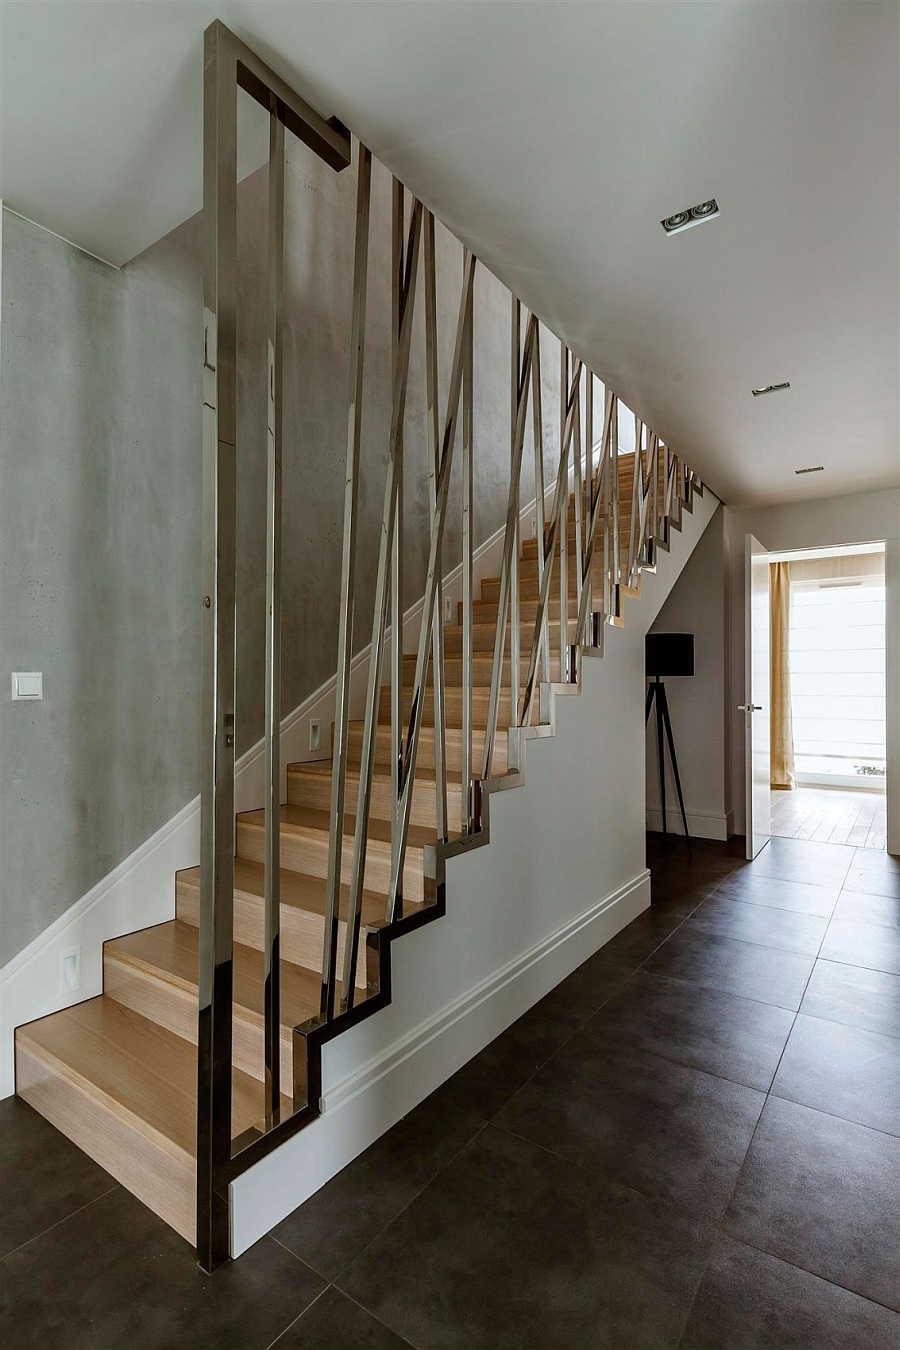 Distinctive railing of the staircase in wood